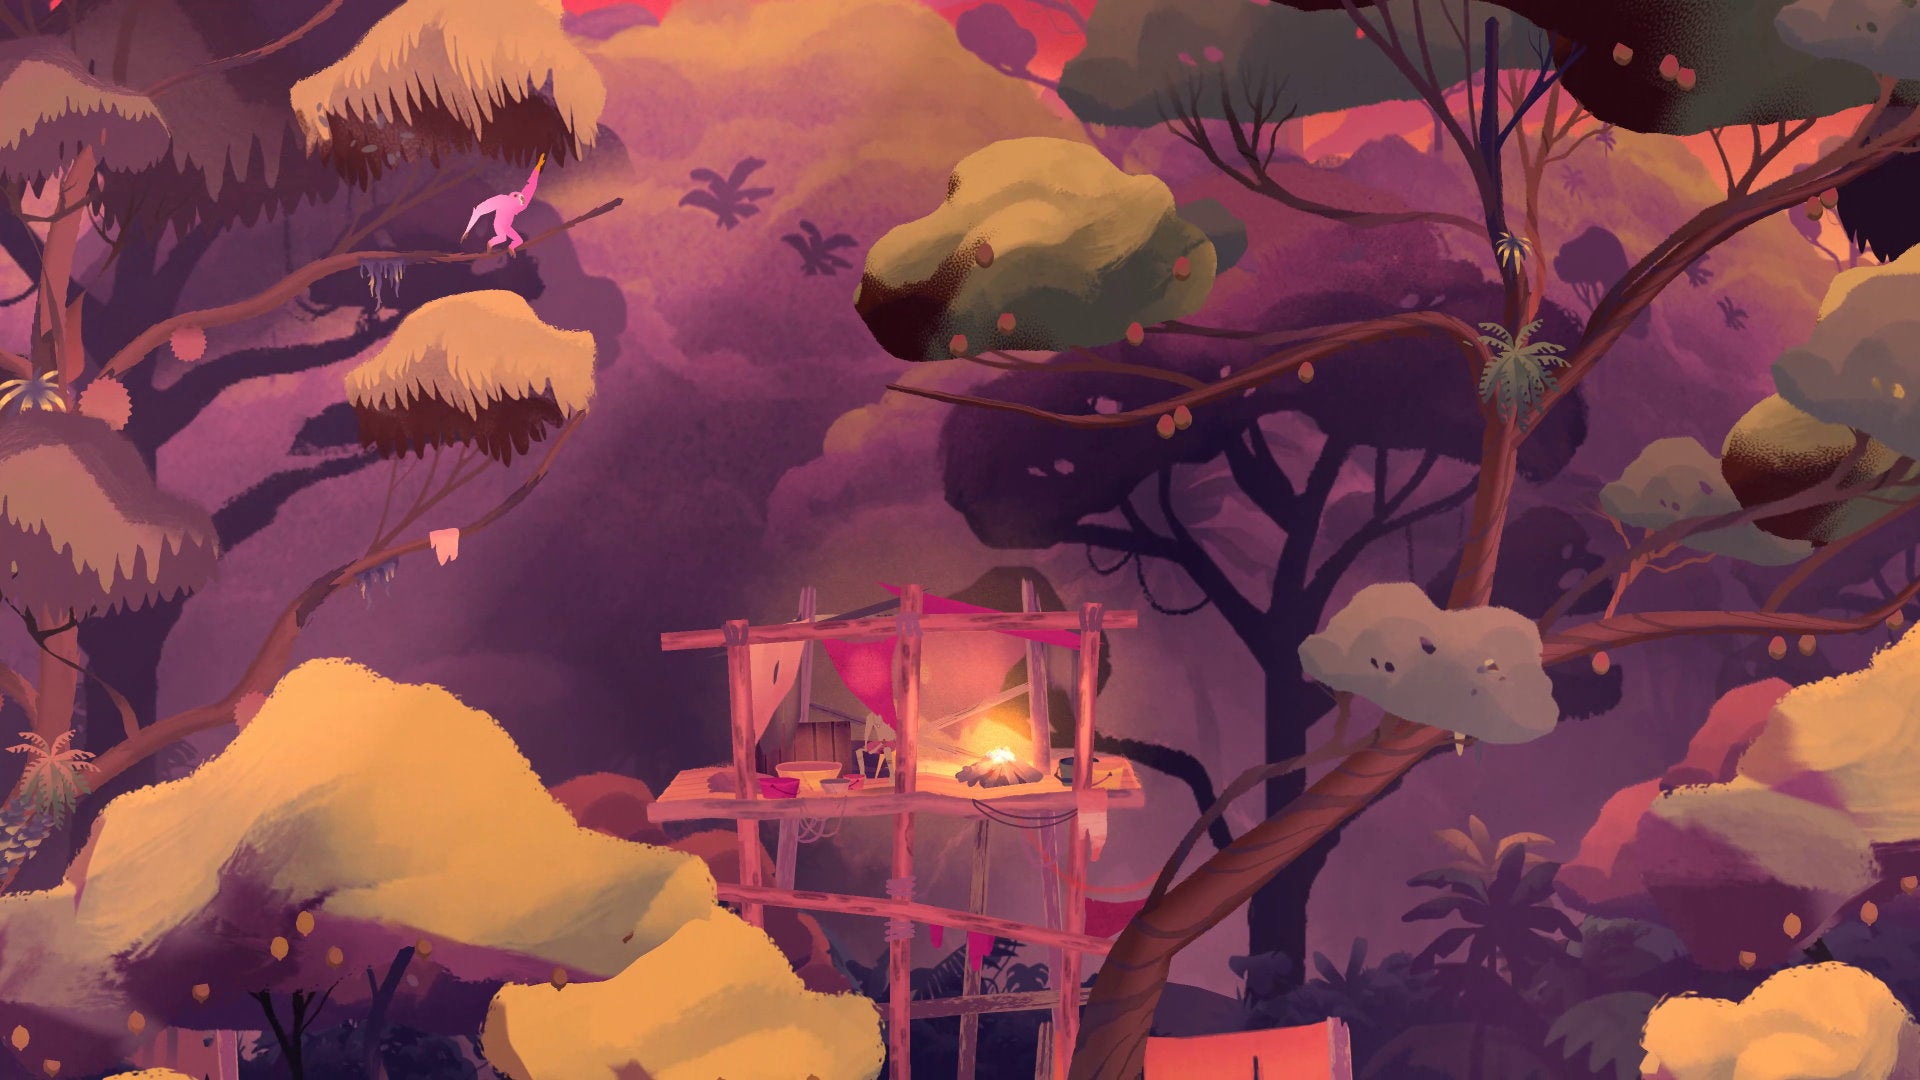 A pink gibbon swings through a jungle scene in Gibbon: Beyond The Trees